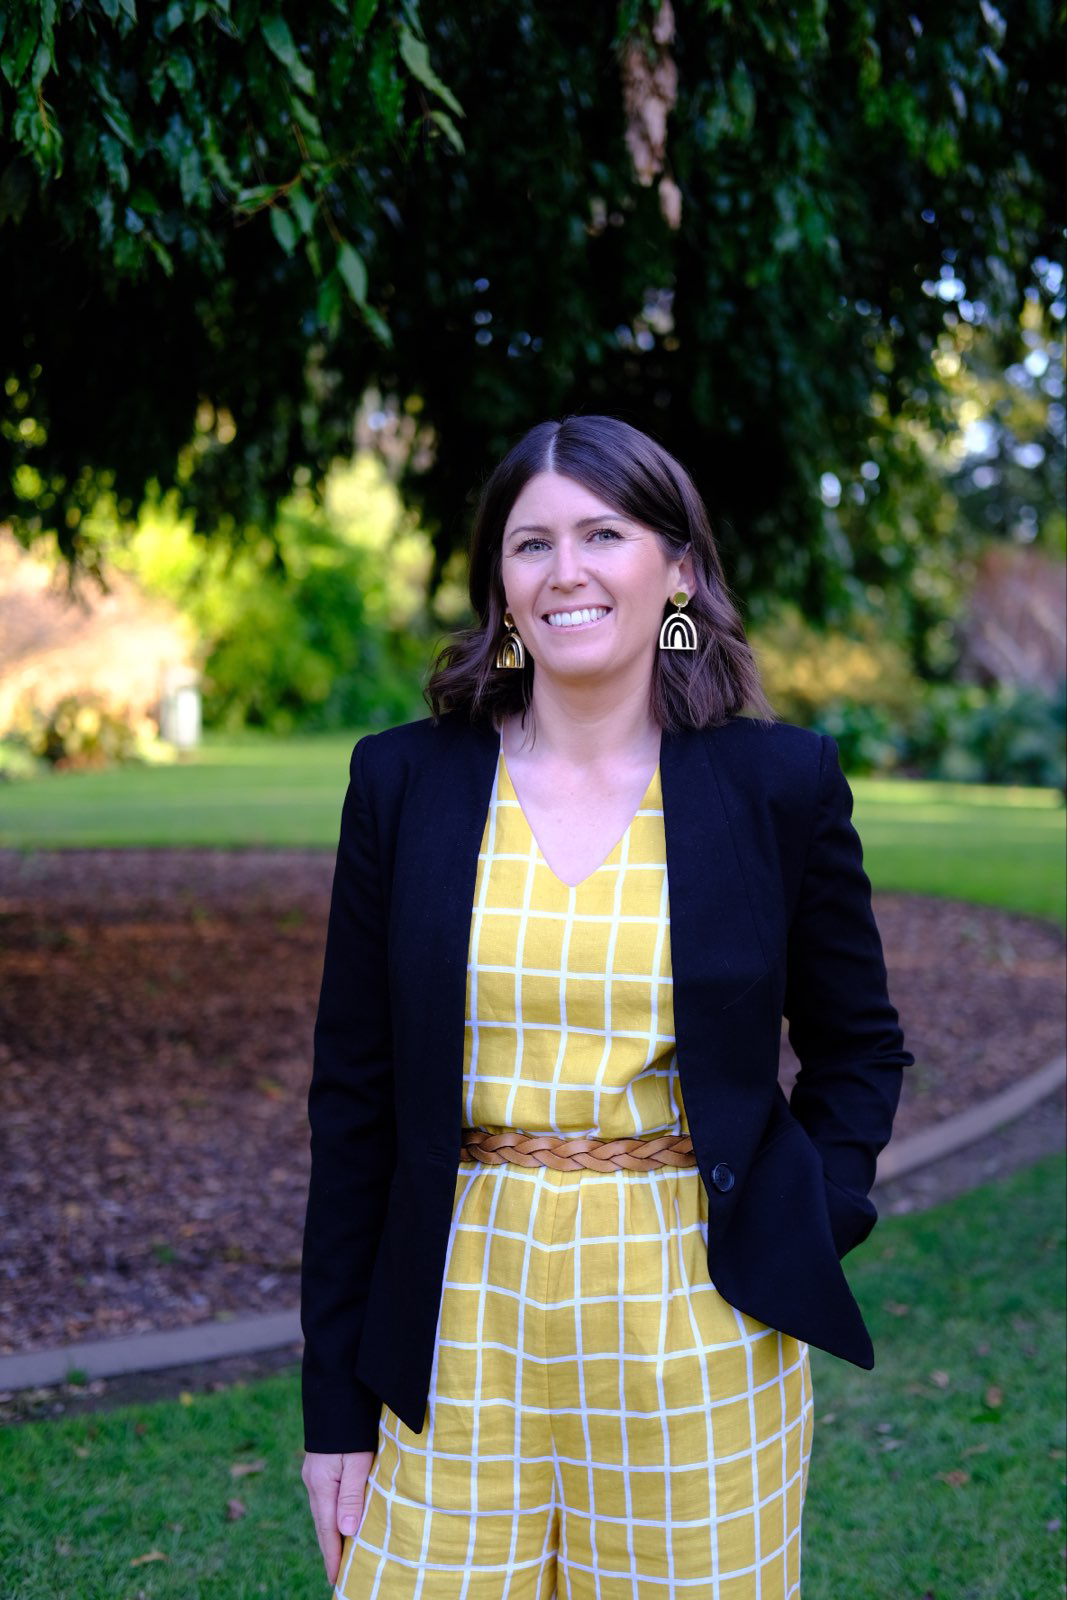 Candidate photo for Ashley Edwards Ashley Edwards, Albury City Councillor, Standing in a park with a yellow outfit.